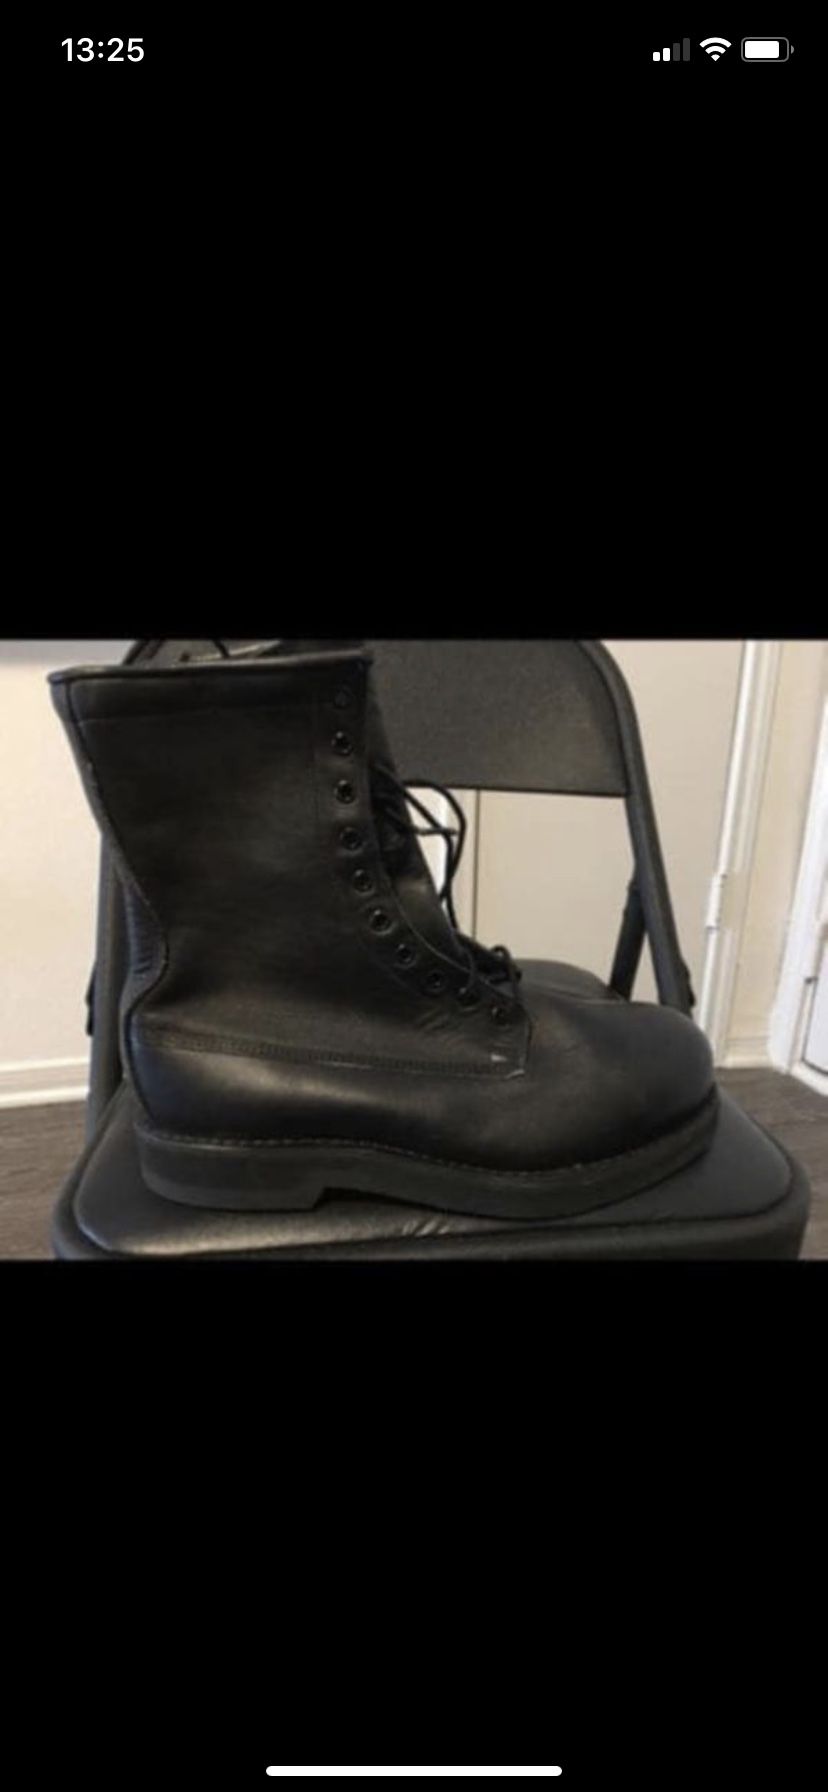 Black leather steel toe boots. New. Made in USA SIZE 9.5W